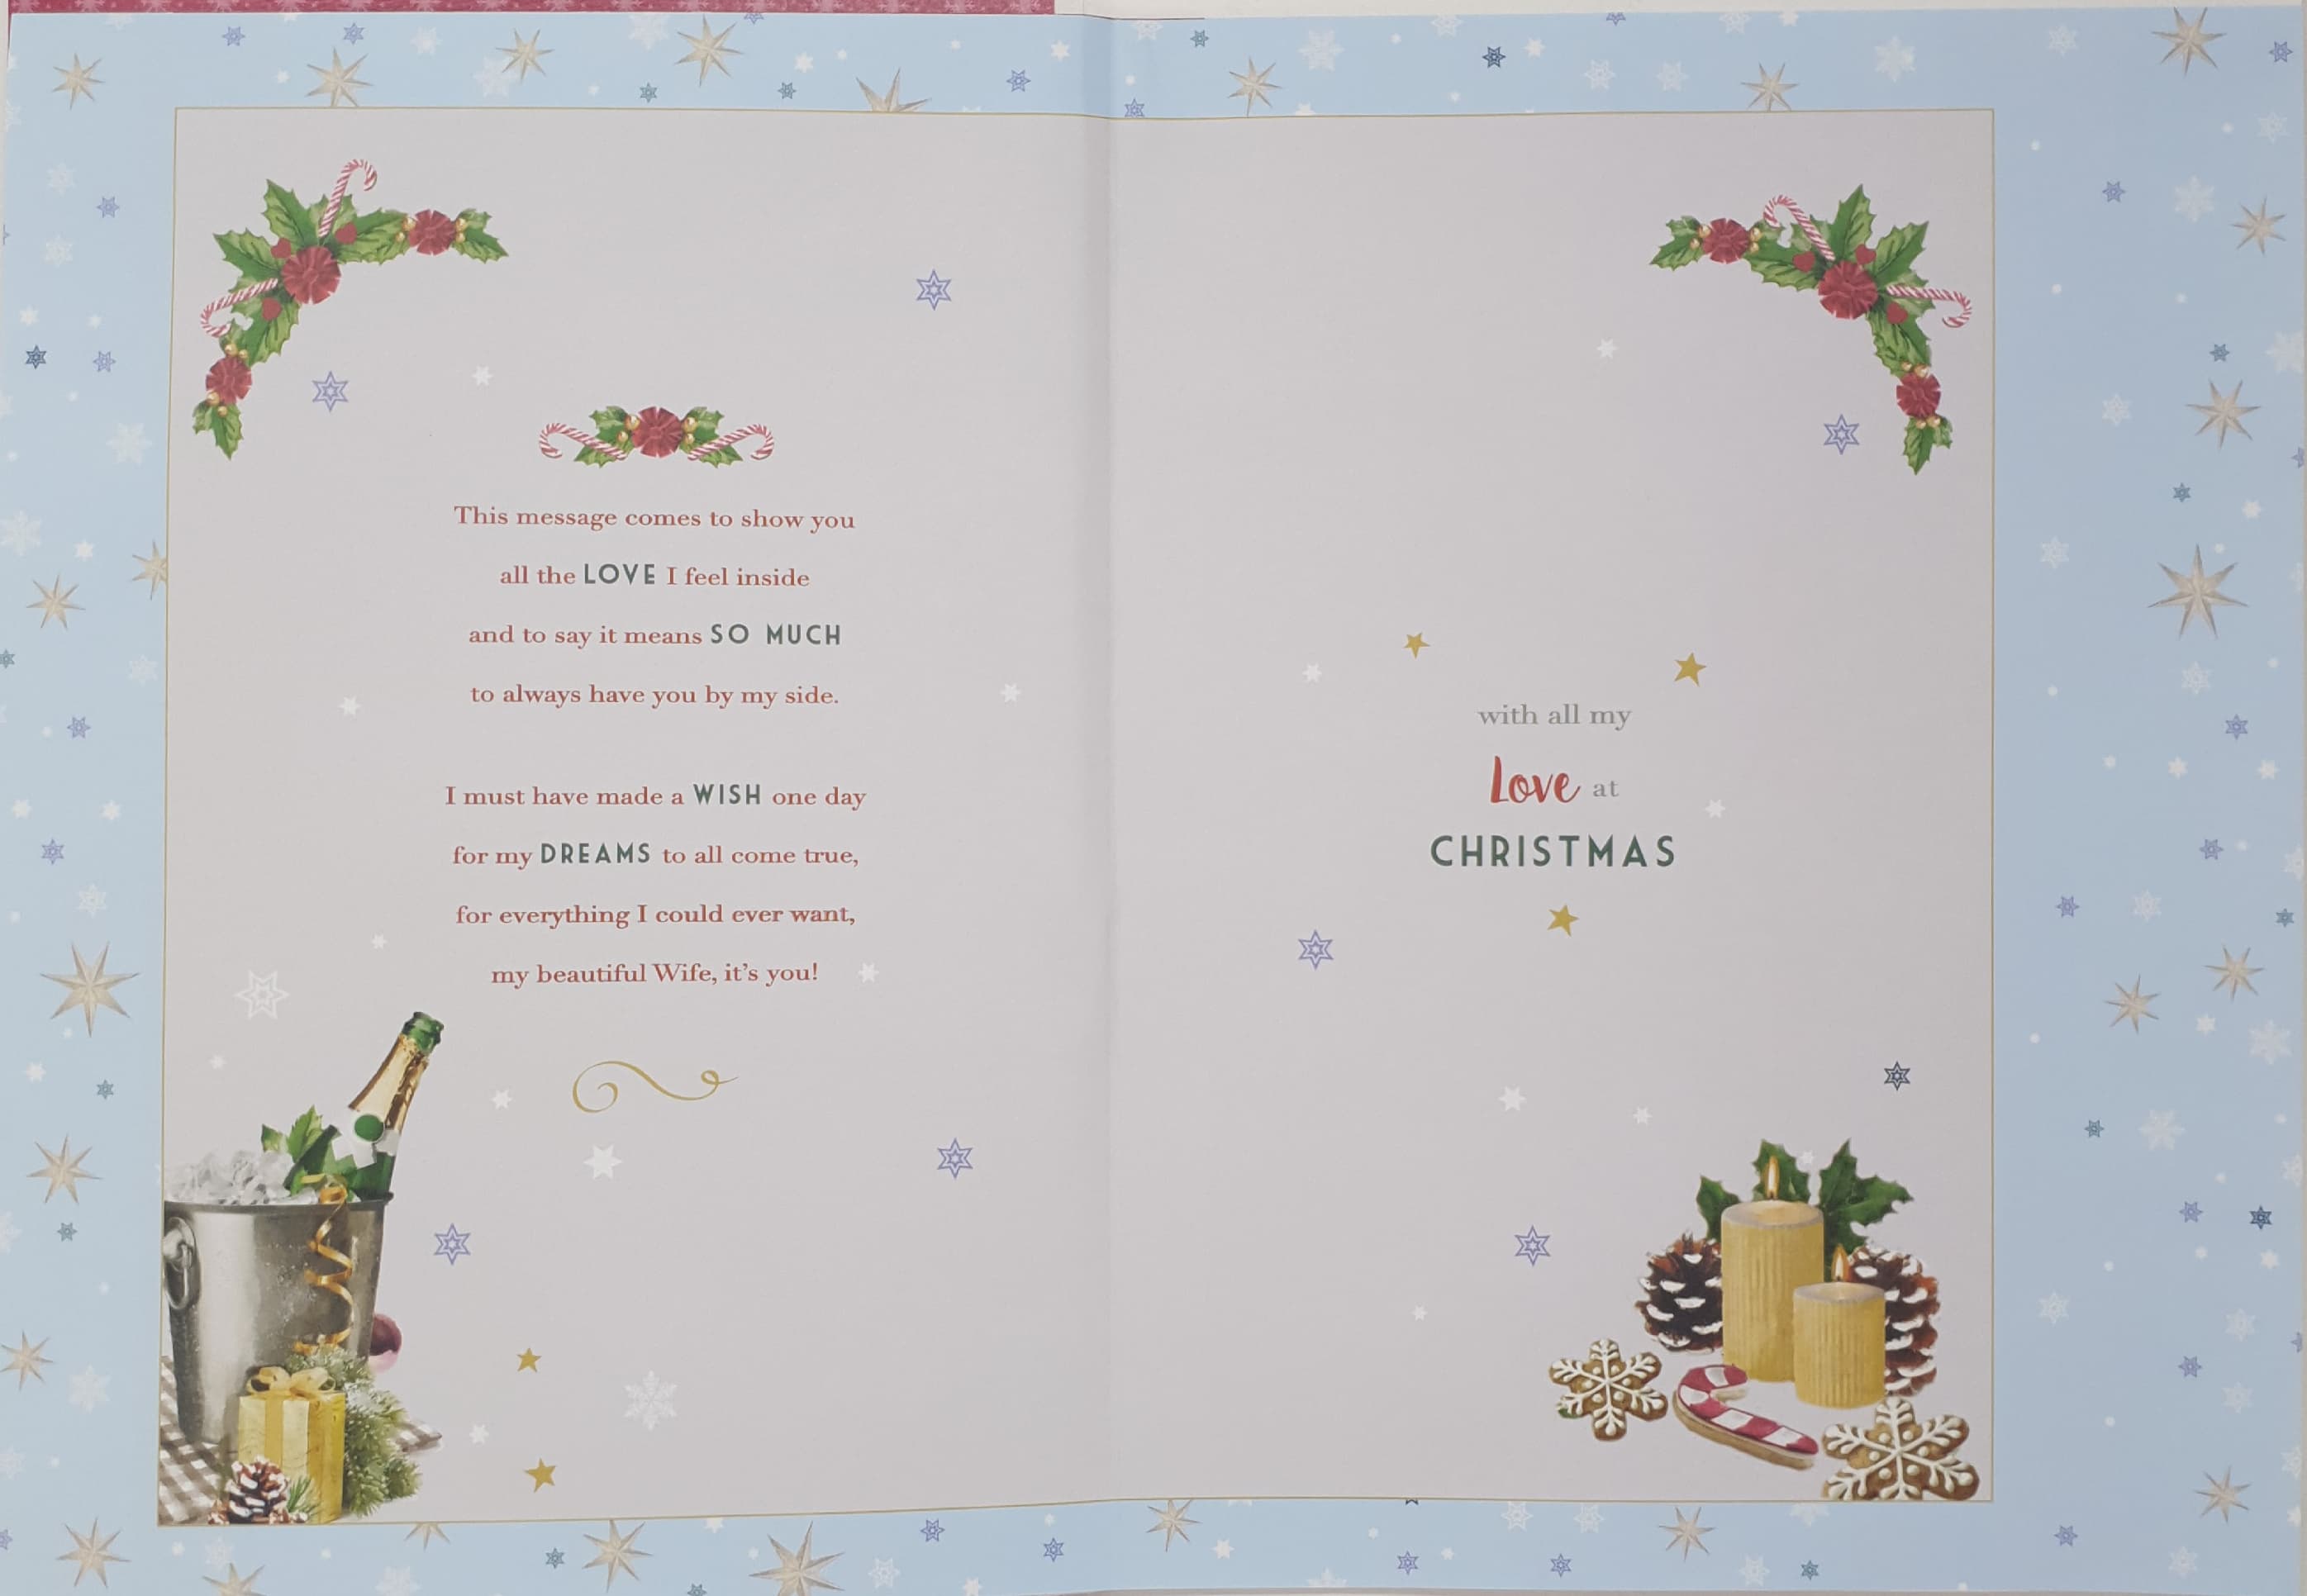 Wife Christmas Card - Champagne Glasses, Red Heart & Decorations (Card In A Presentation Box)